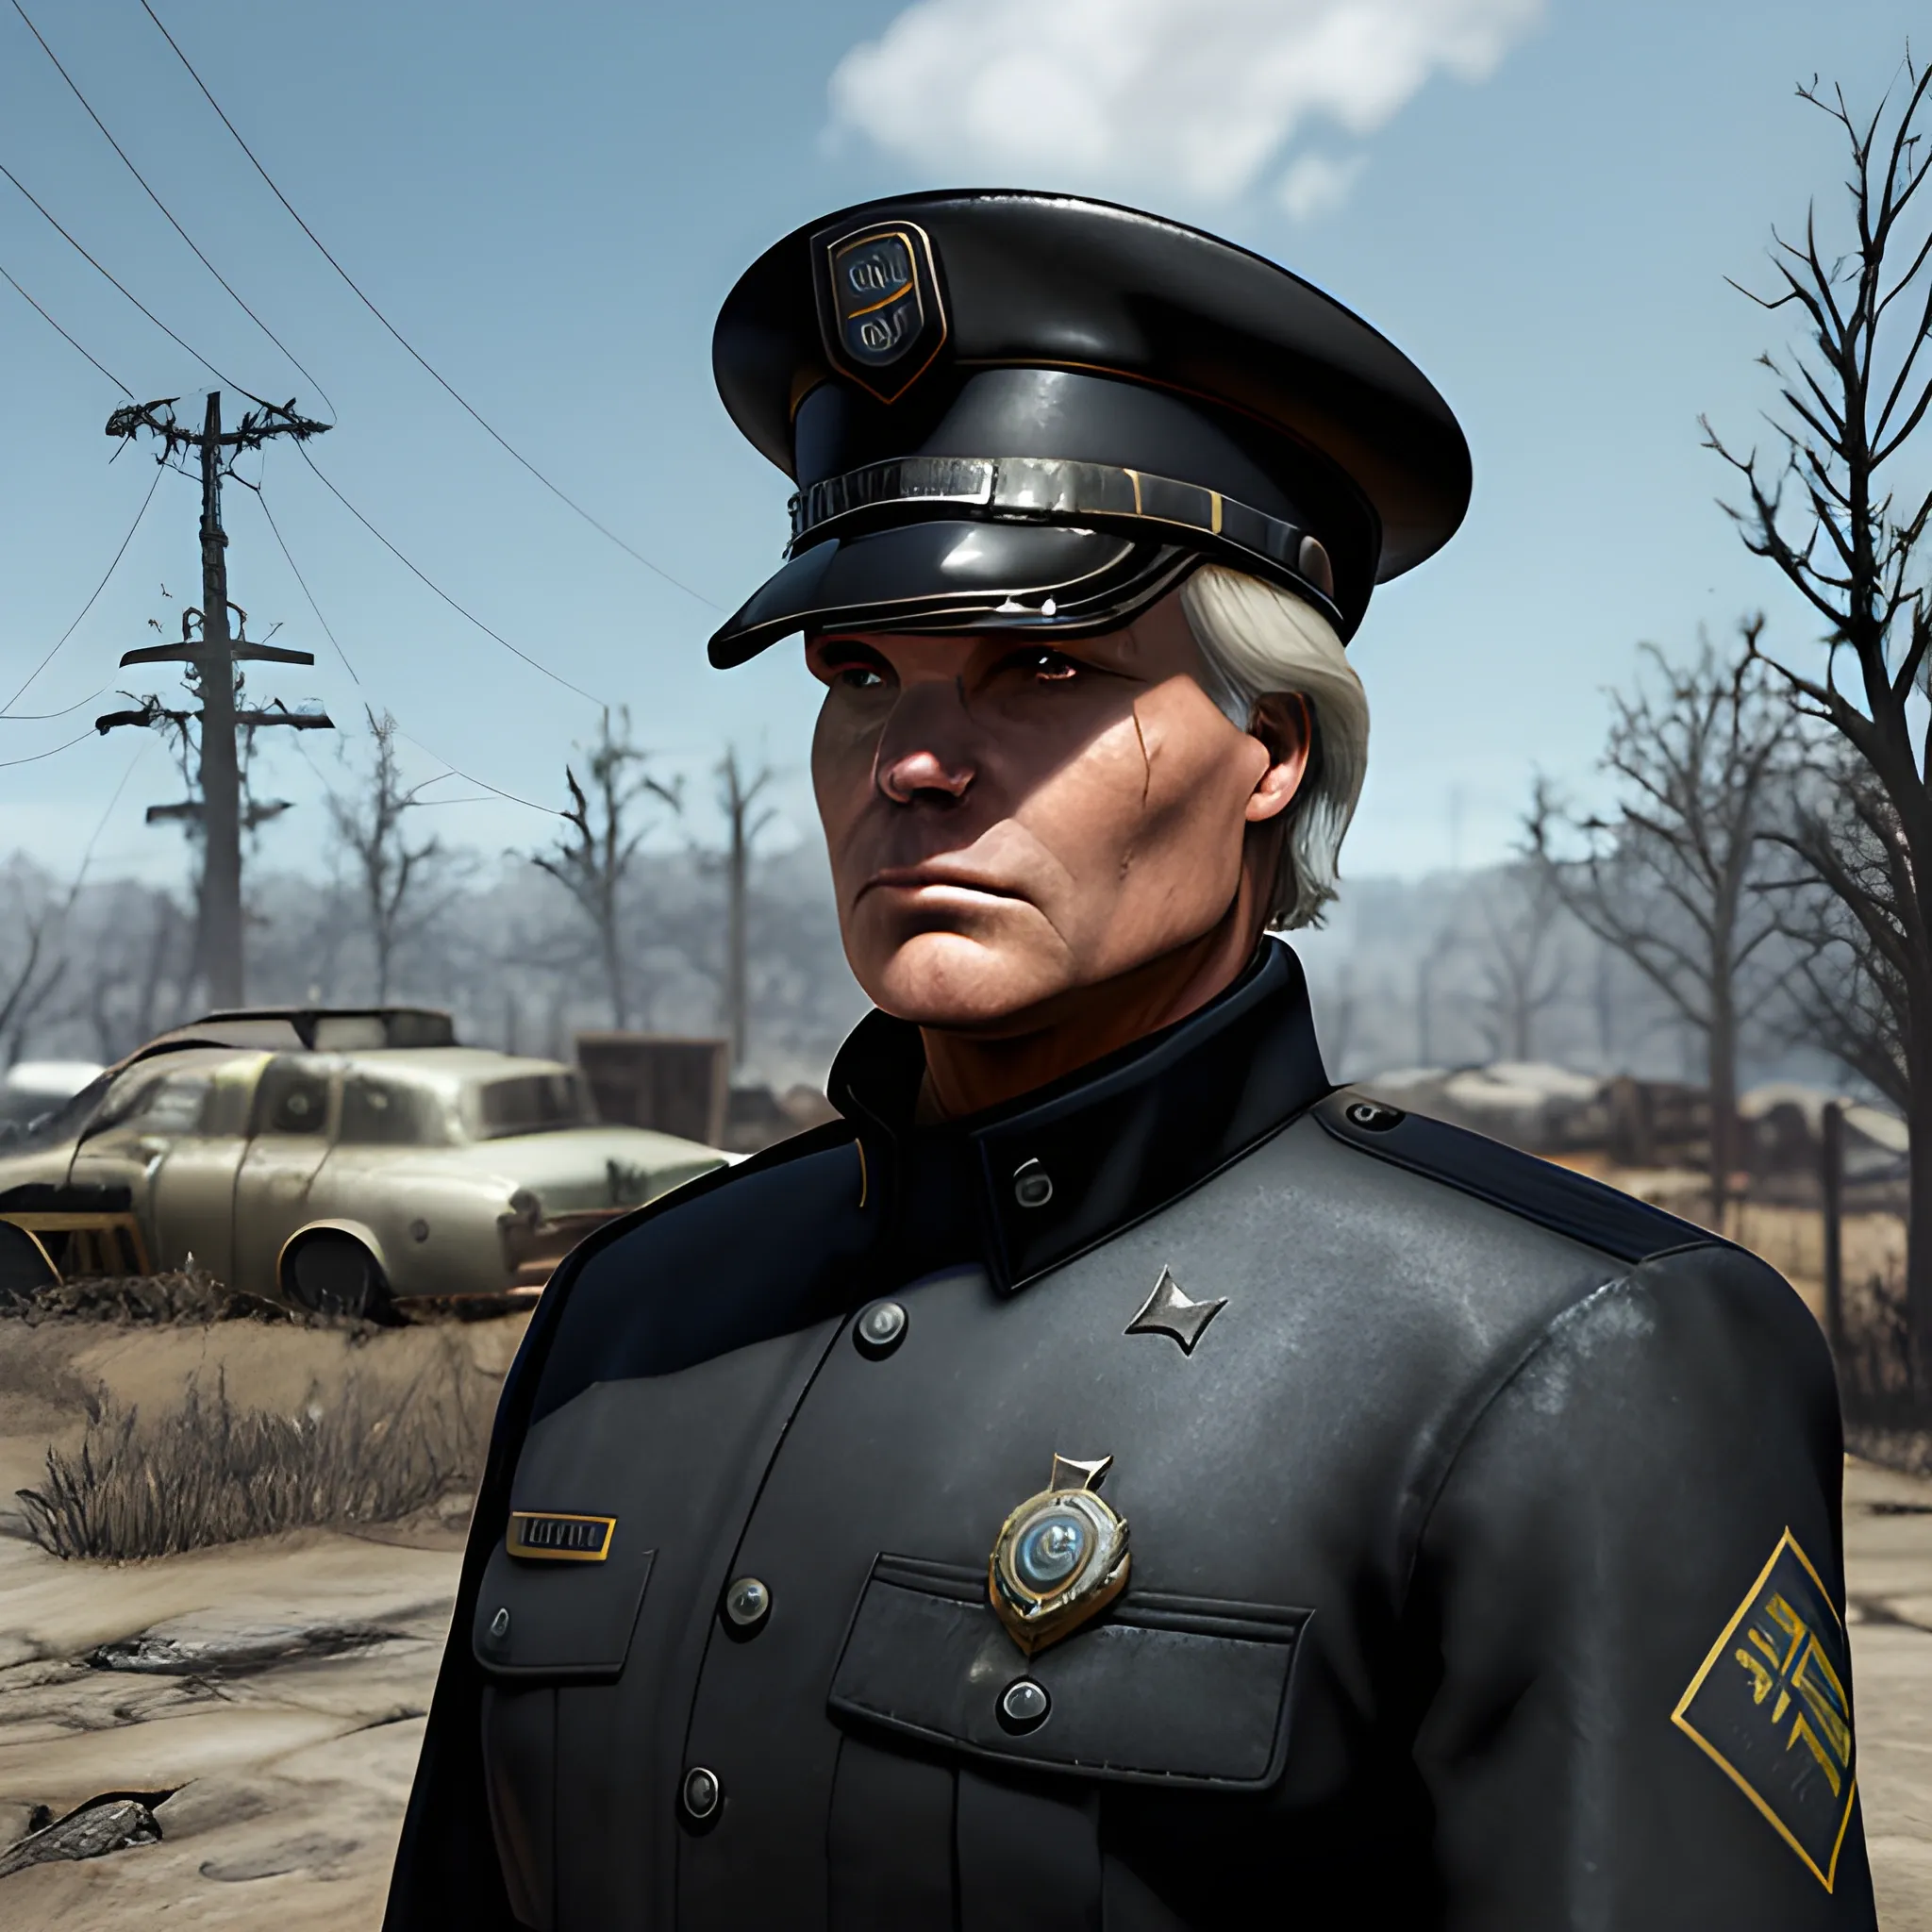 In the style of Fallout 4, masterpiece, Richard Dean Anderson from 1985 as an Enclave officer in a crisp black uniform complete with officers hat. The insignia is an E surrounded by 13 stars